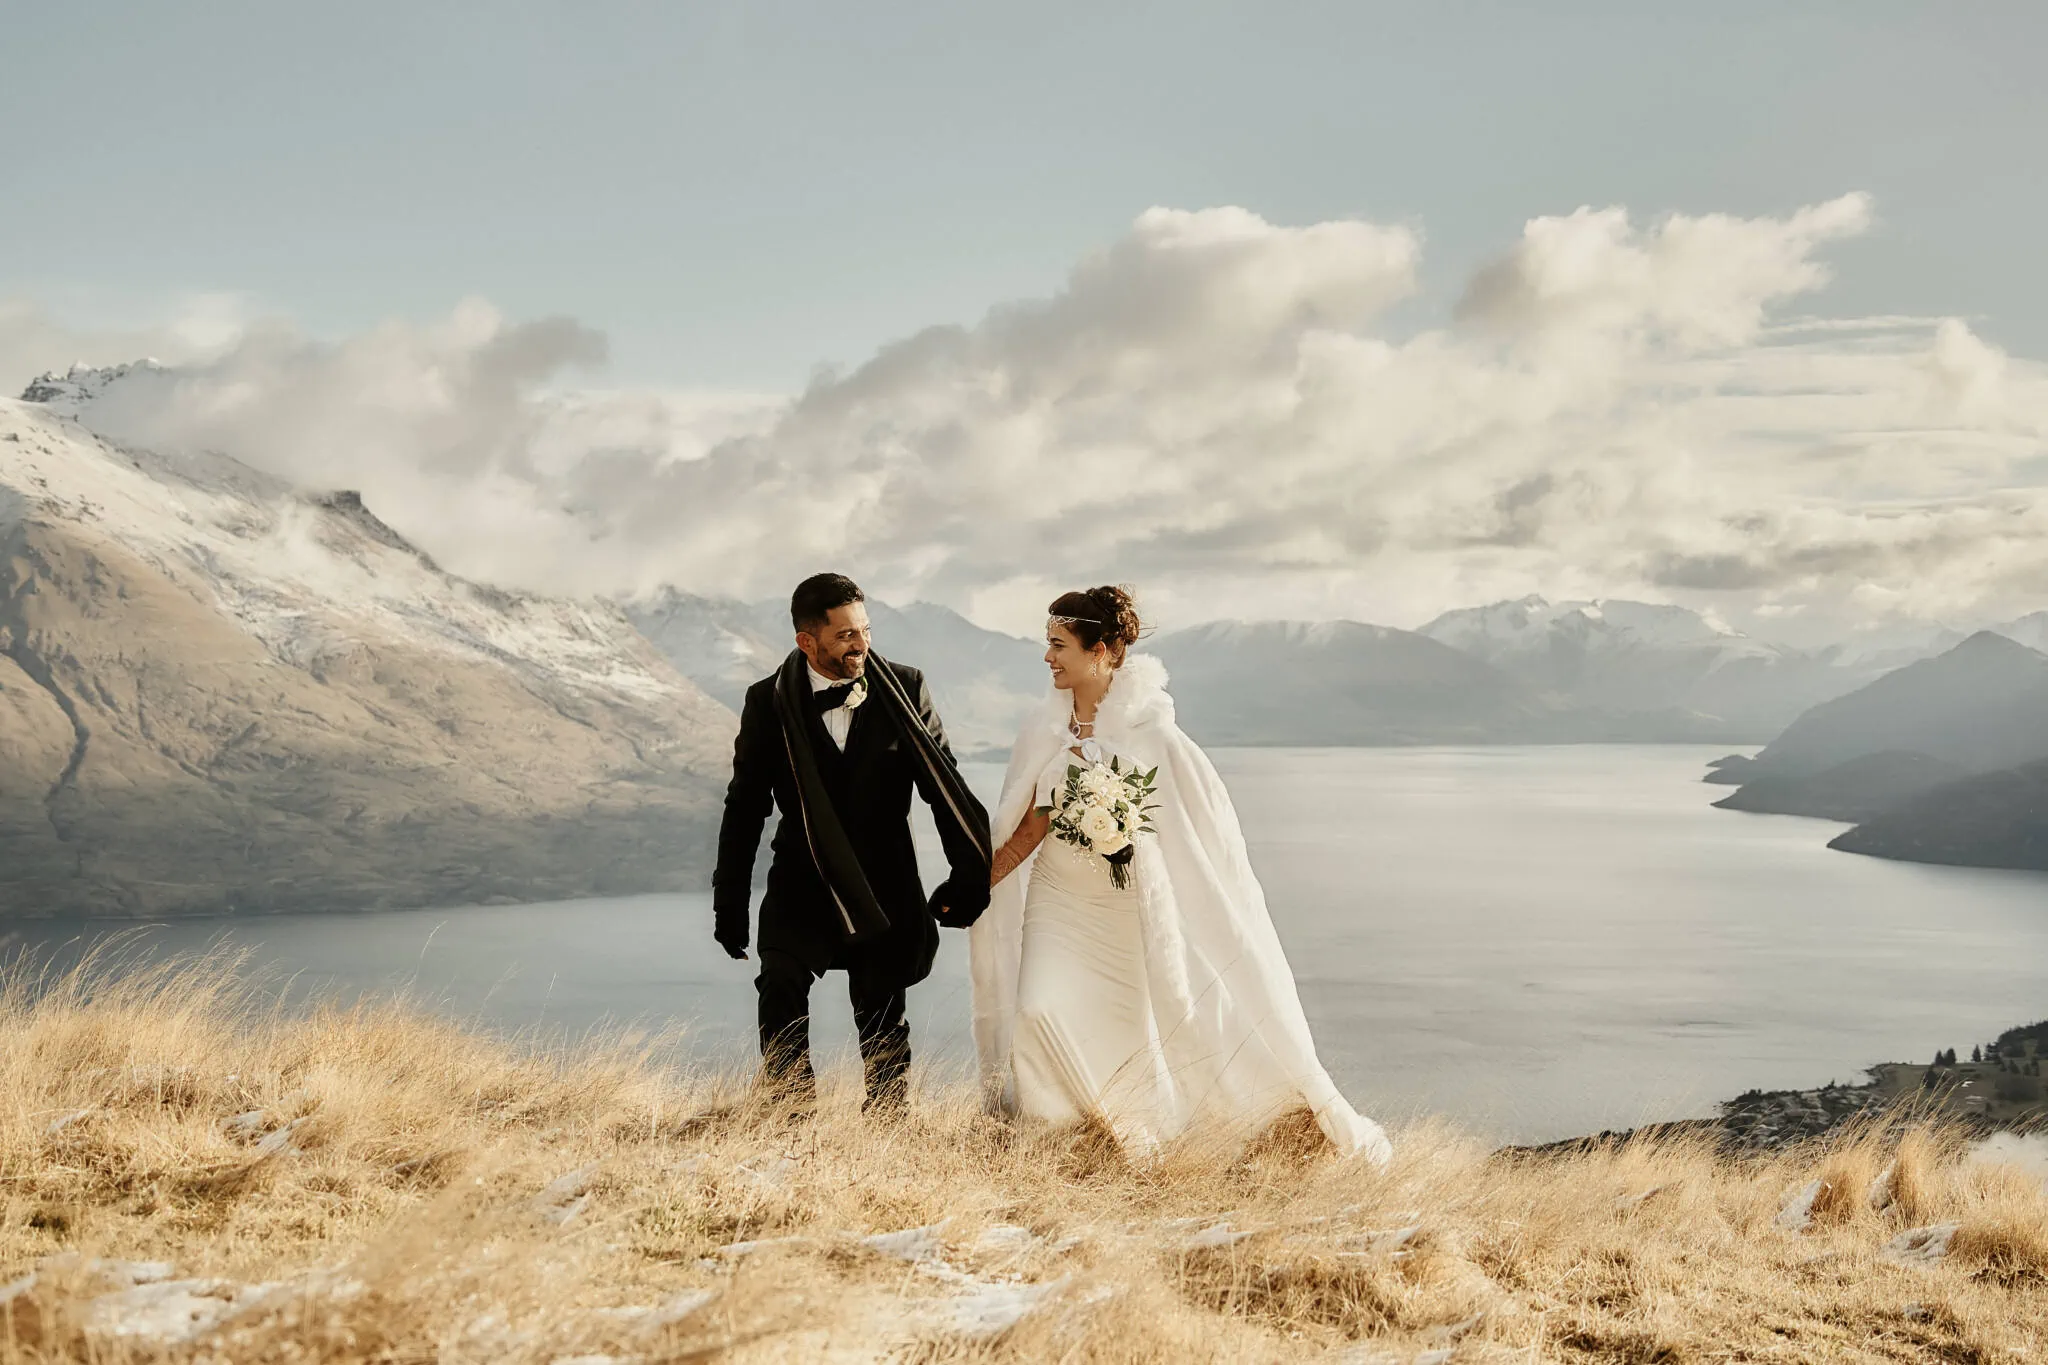 Queenstown New Zealand Elopement Wedding Photographer - Wasim and Yumn, Queenstown Islamic Wedding - A bride and groom standing on top of a hill overlooking Lake Wanaka.